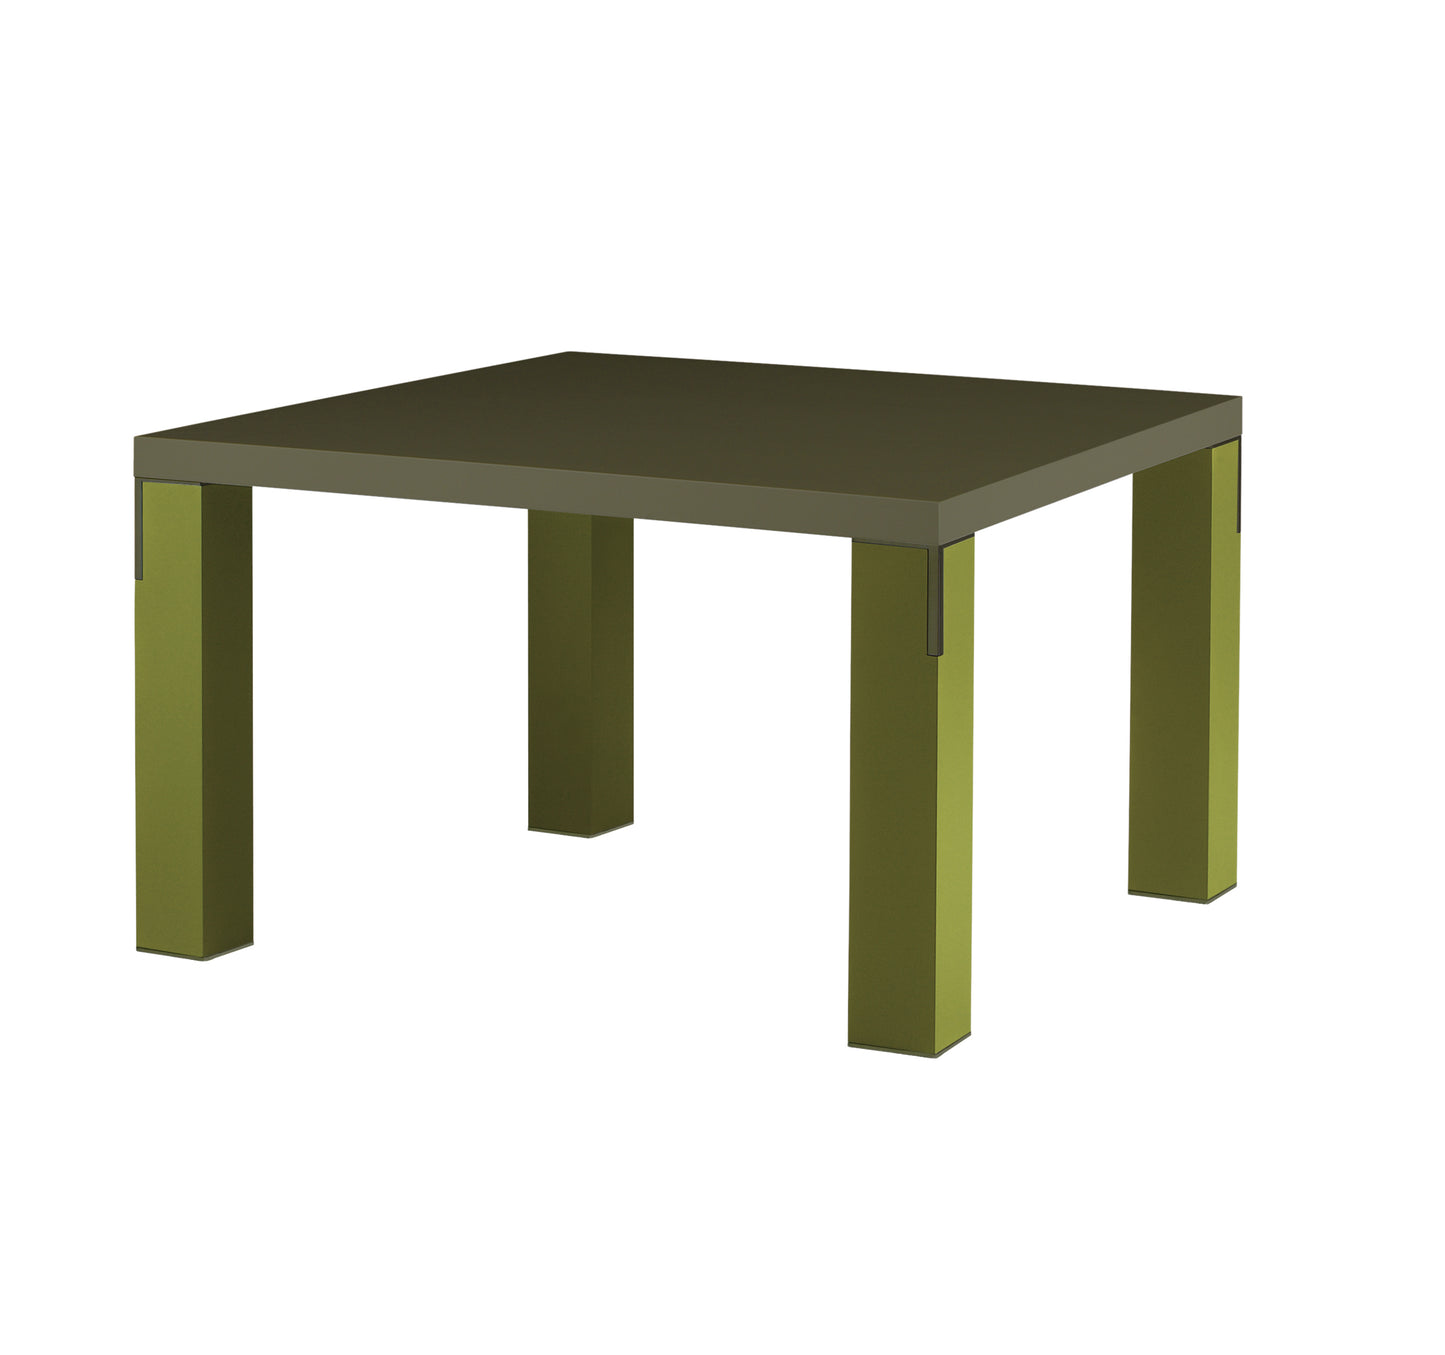 MATT LACQUERED SQUARE DINING TABLE FIRENZE